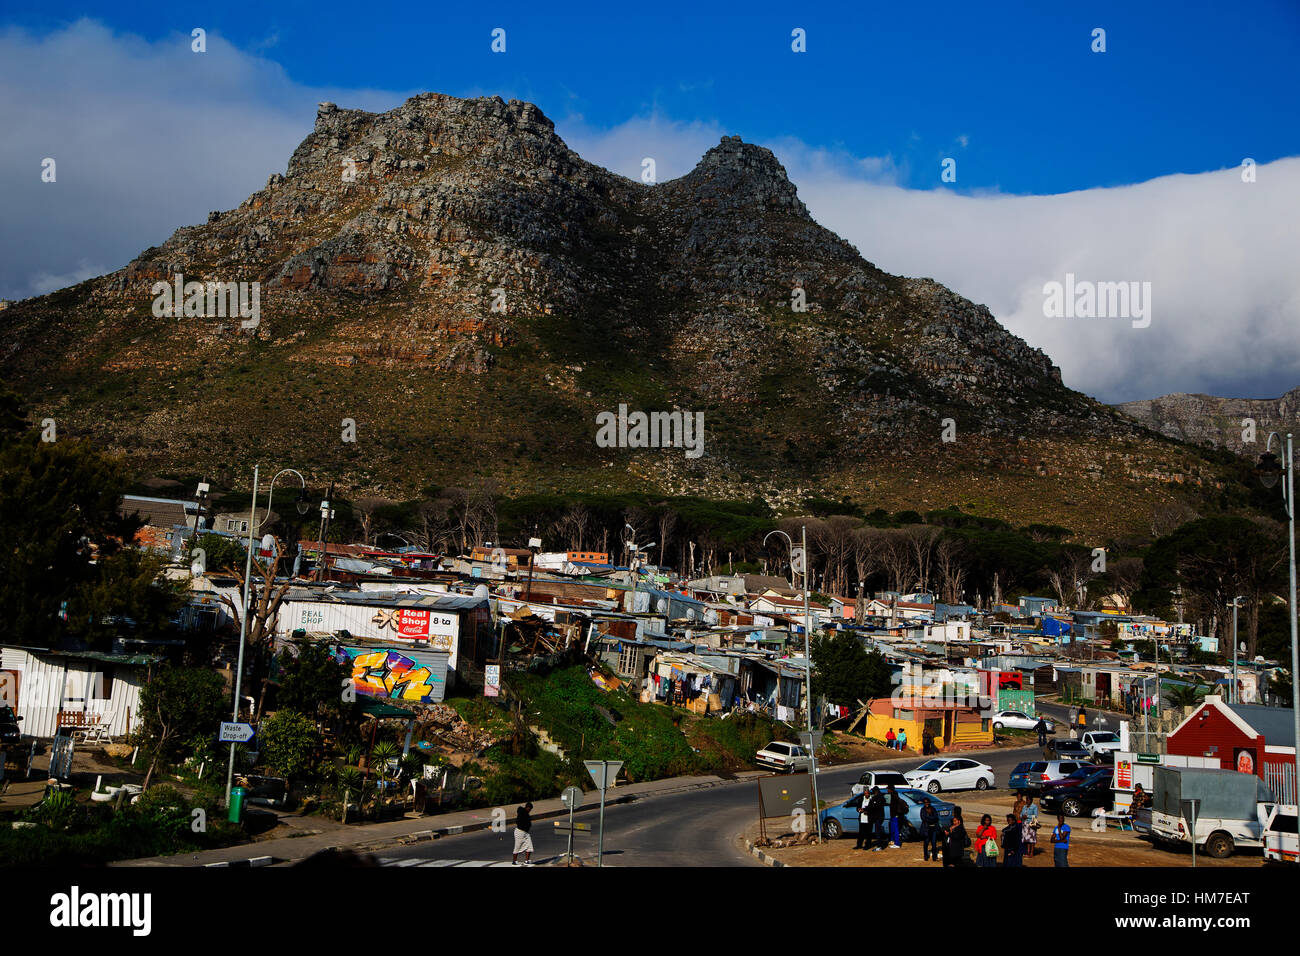 Shanty town on the Hout Bay outskirts Imizamo Yethu township, Hout Bay, Cape Town, South Africa Stock Photo